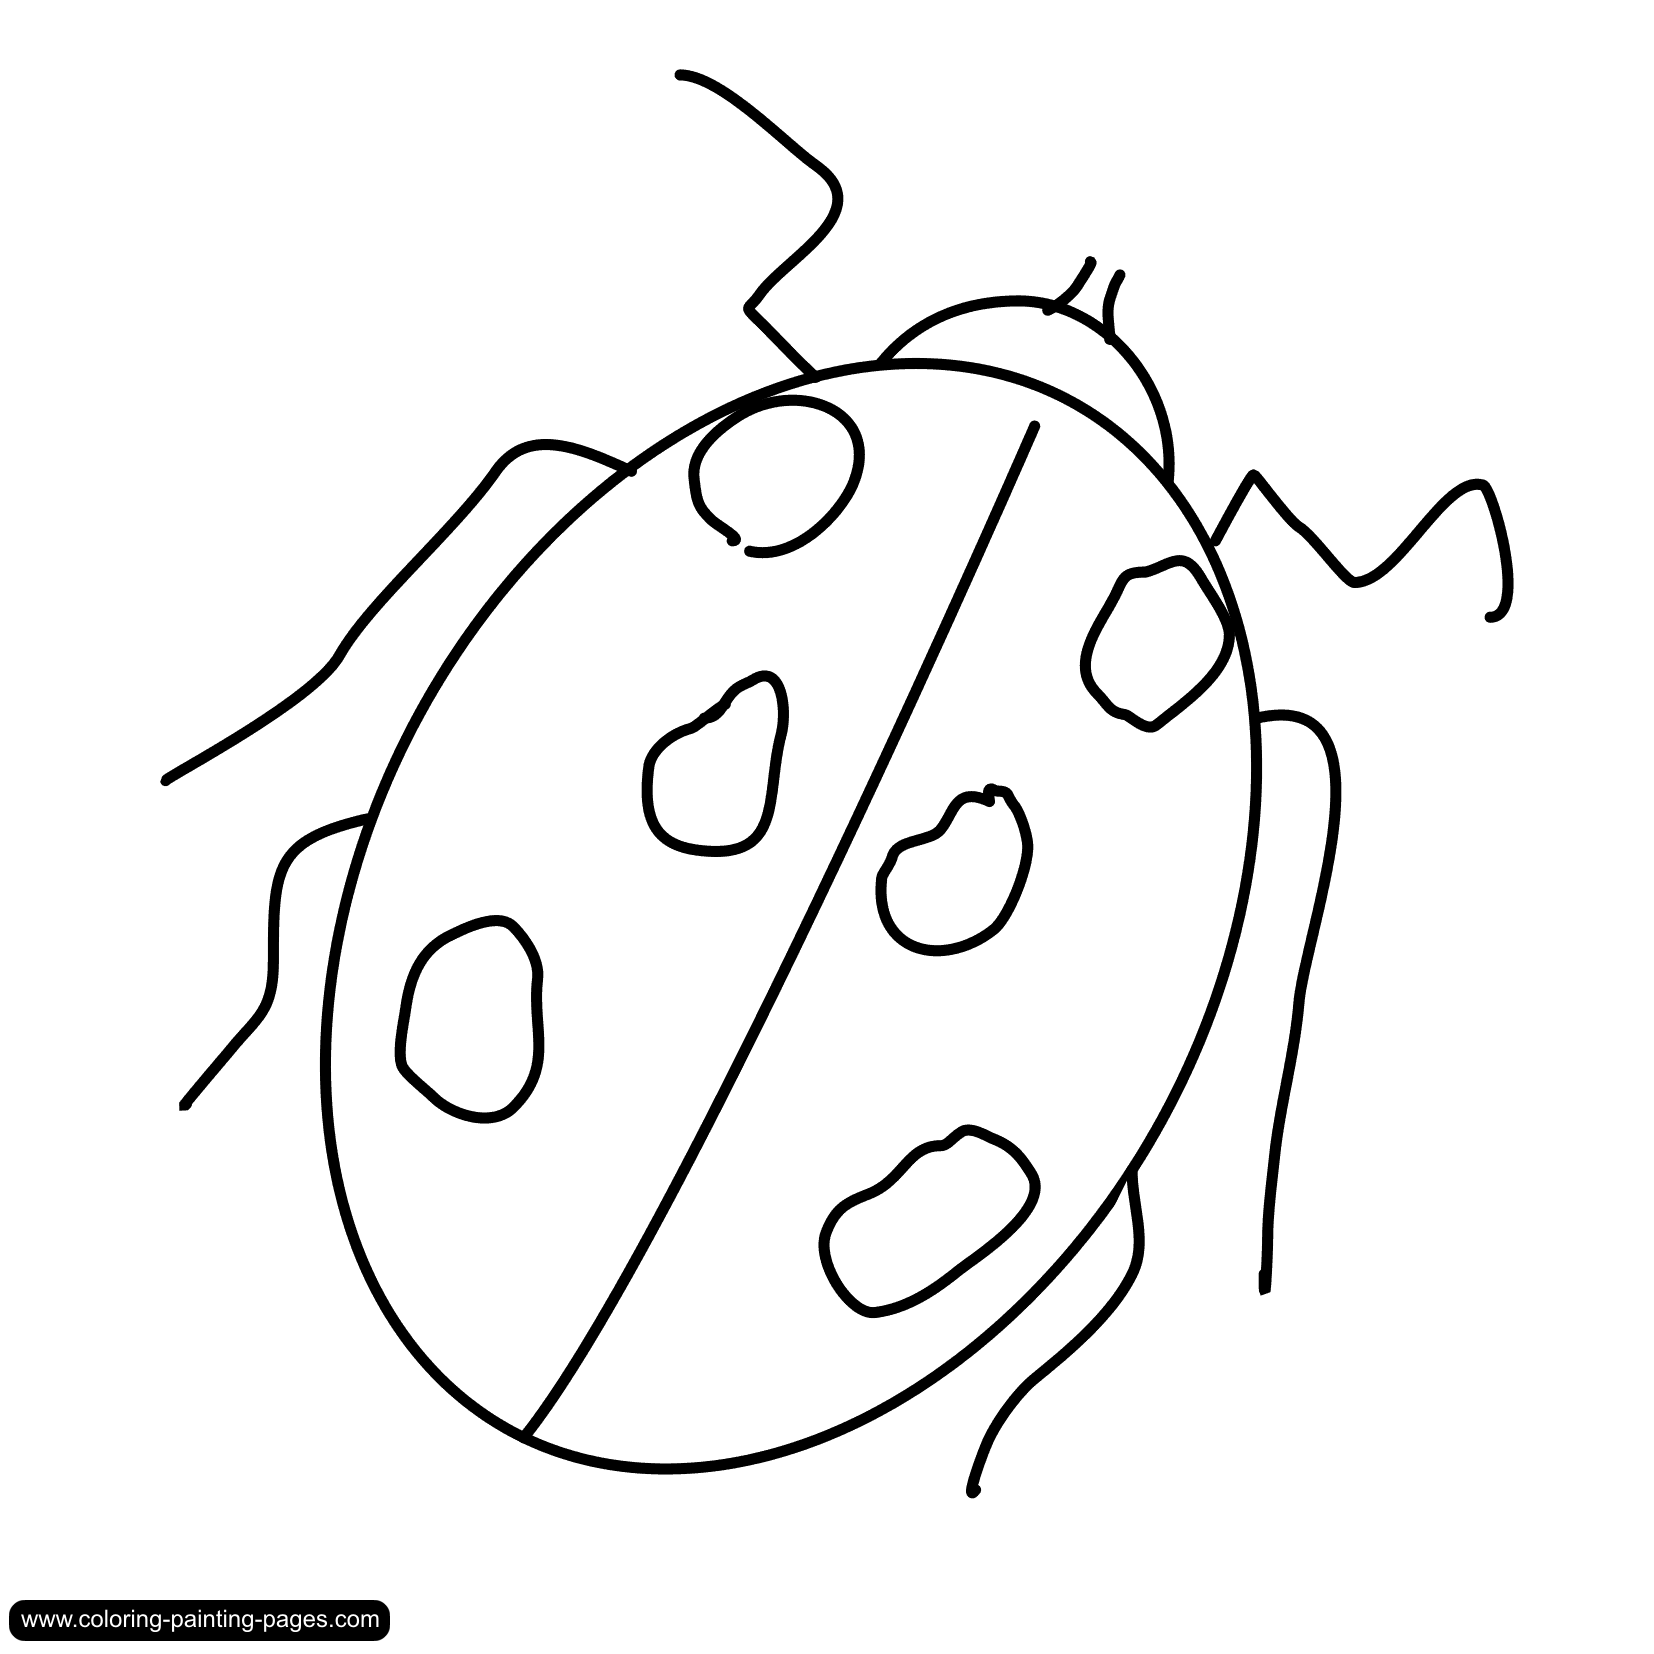 Coloring pages Animals - free downloads